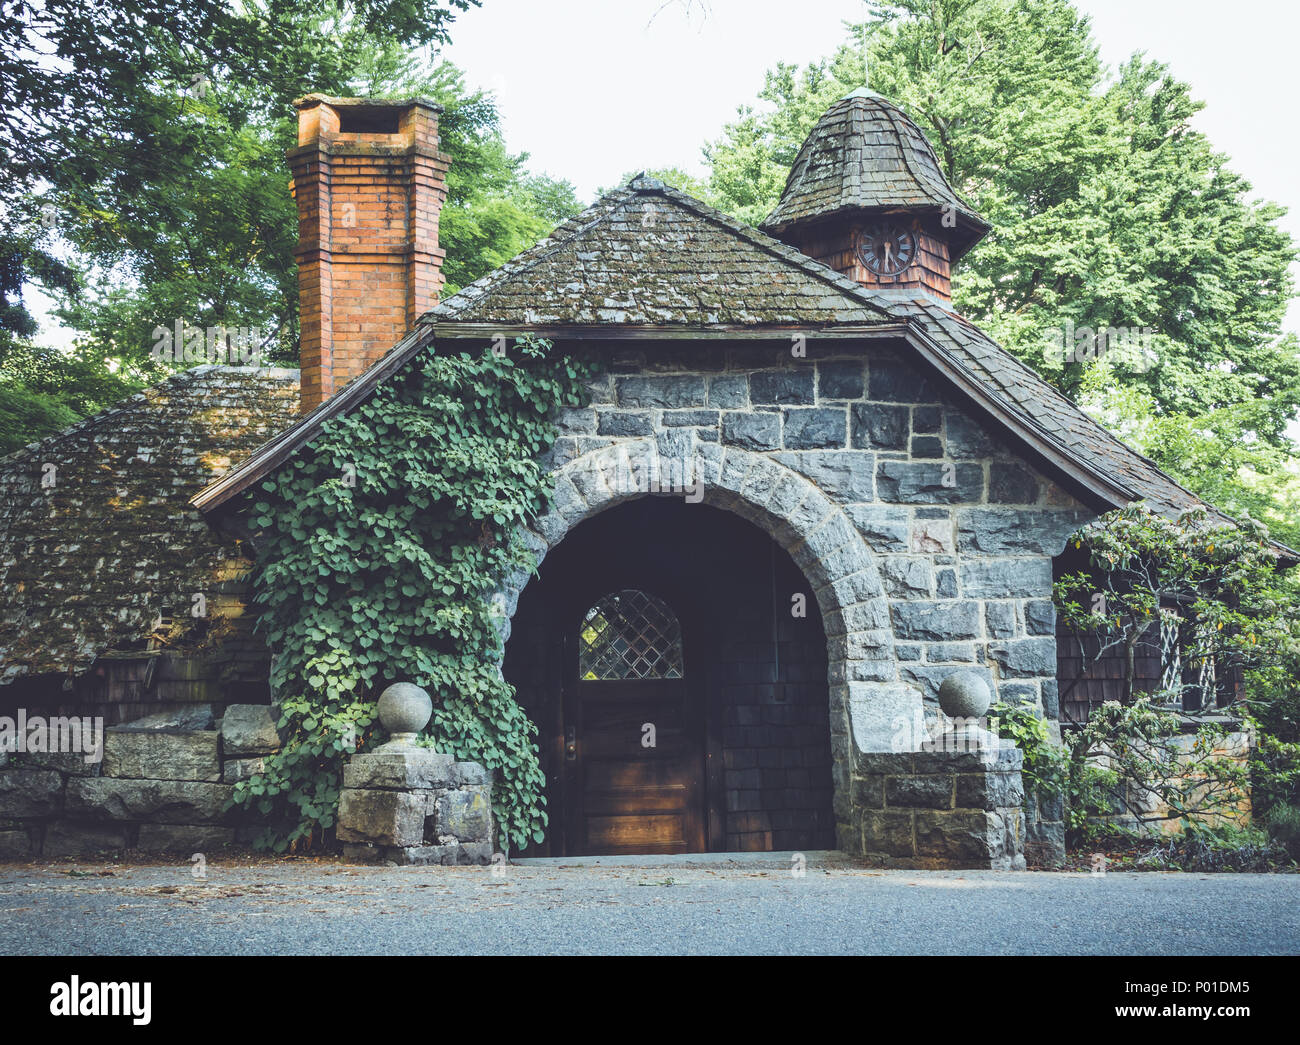 Old stone pumphouse in tudor revival architecture at Ringwood State Park, NJ in vintage setting Stock Photo